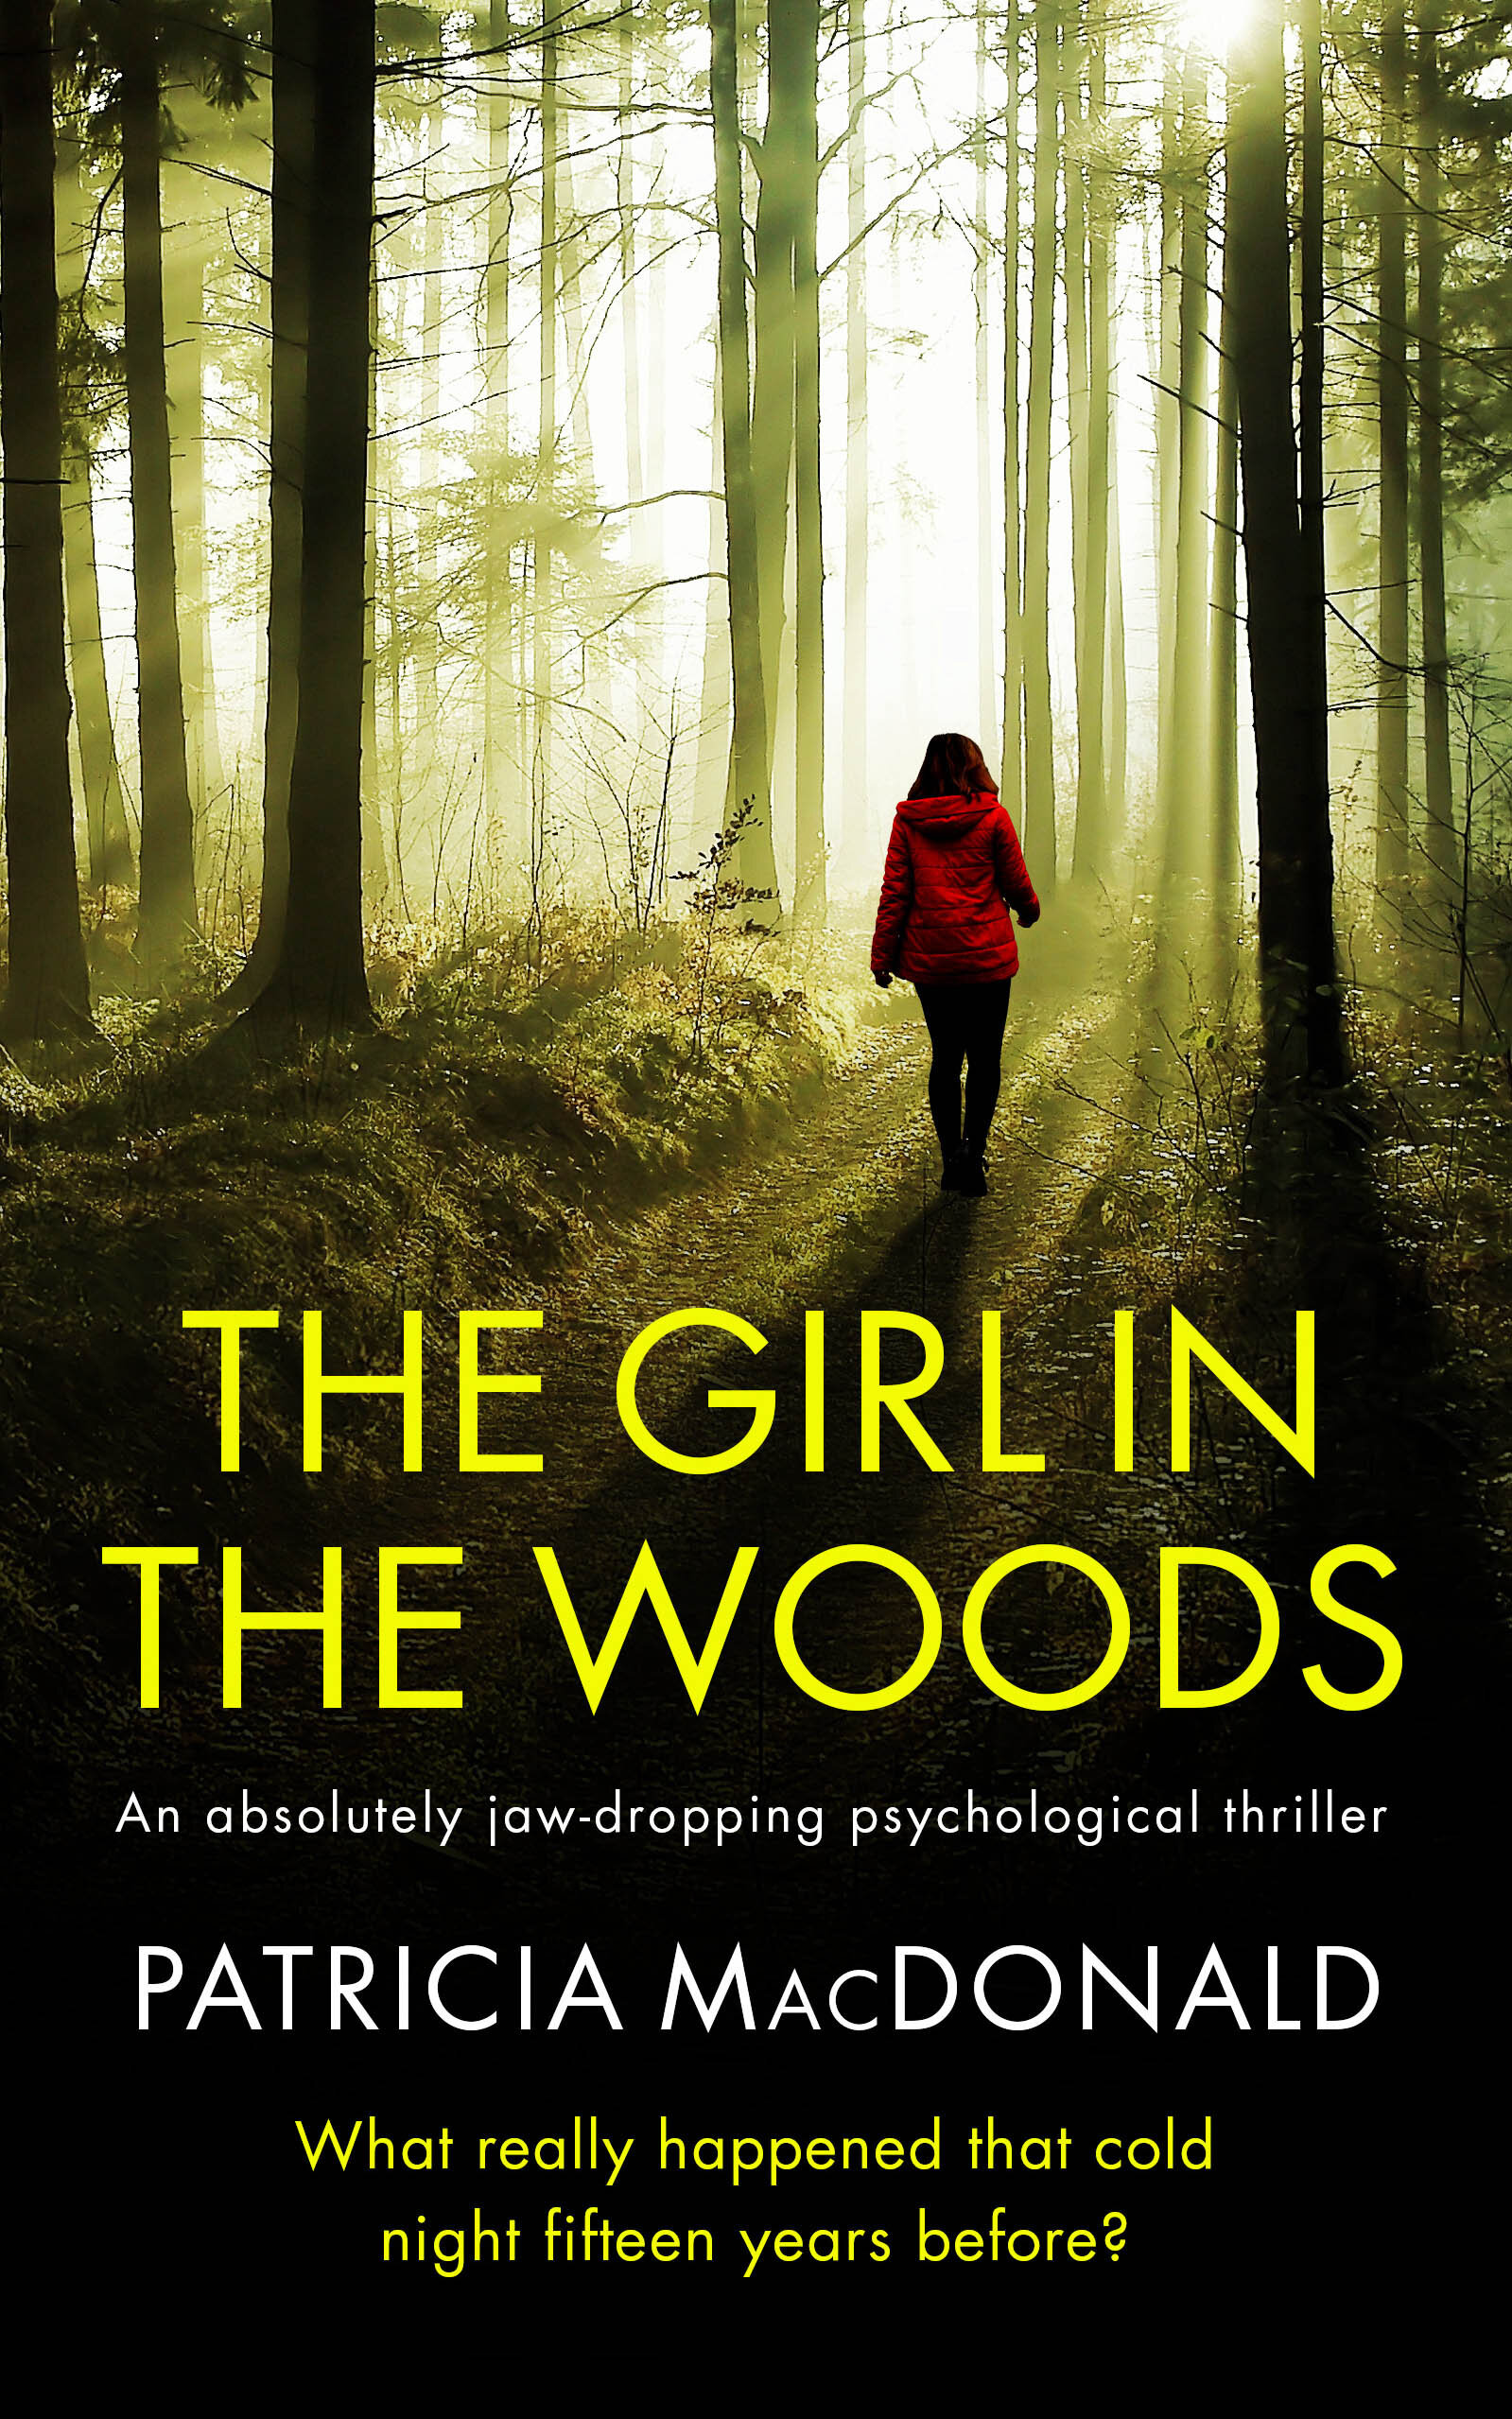 THE GIRL IN THE WOODS publish cover.jpg